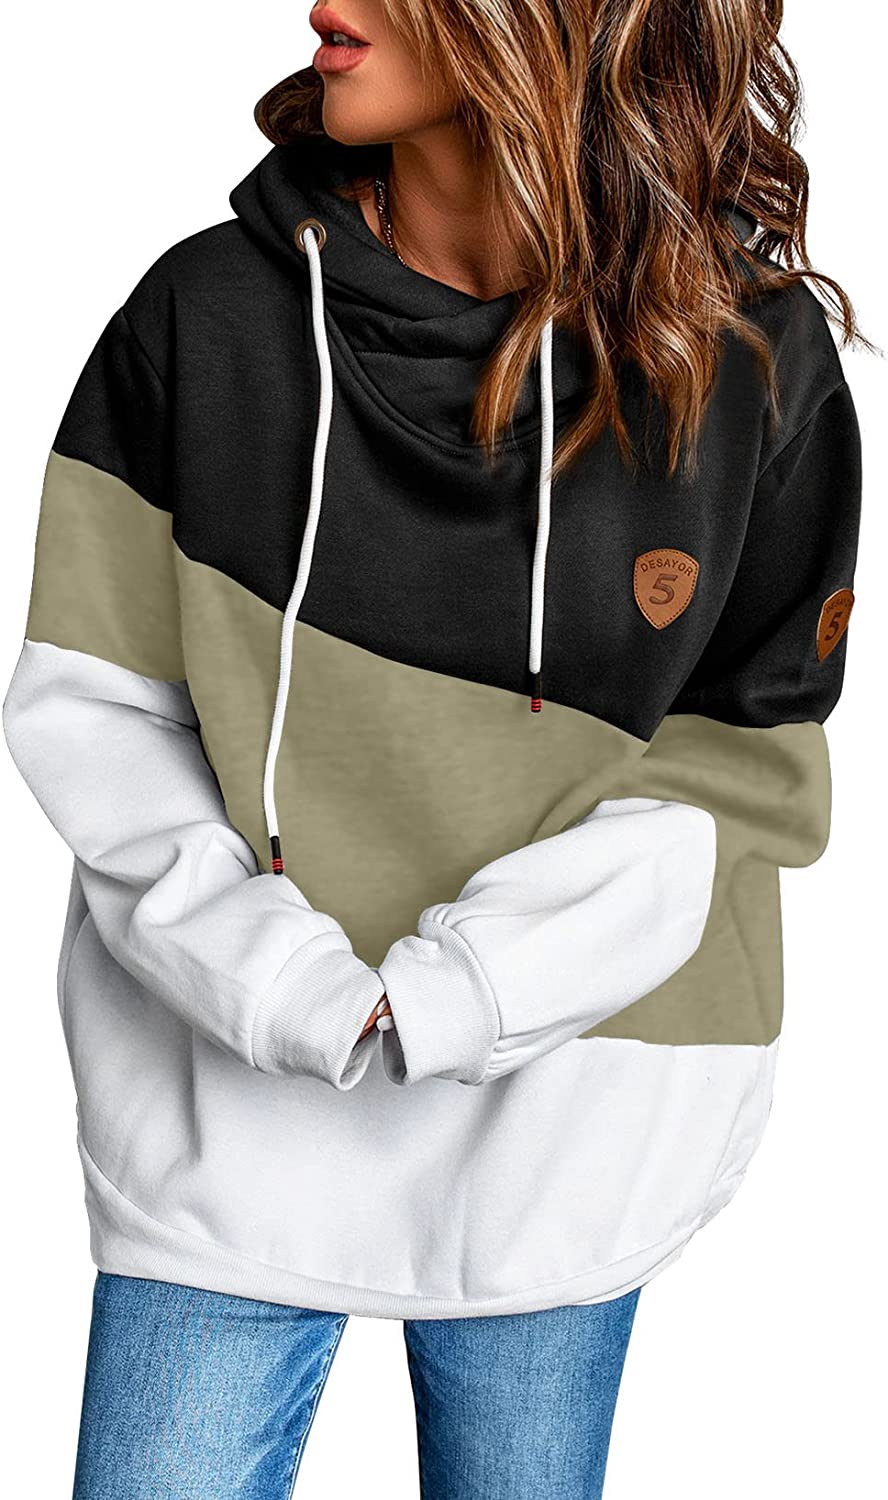  Happy Sailed Womens Cowl Neck Color Block Hoodies Long